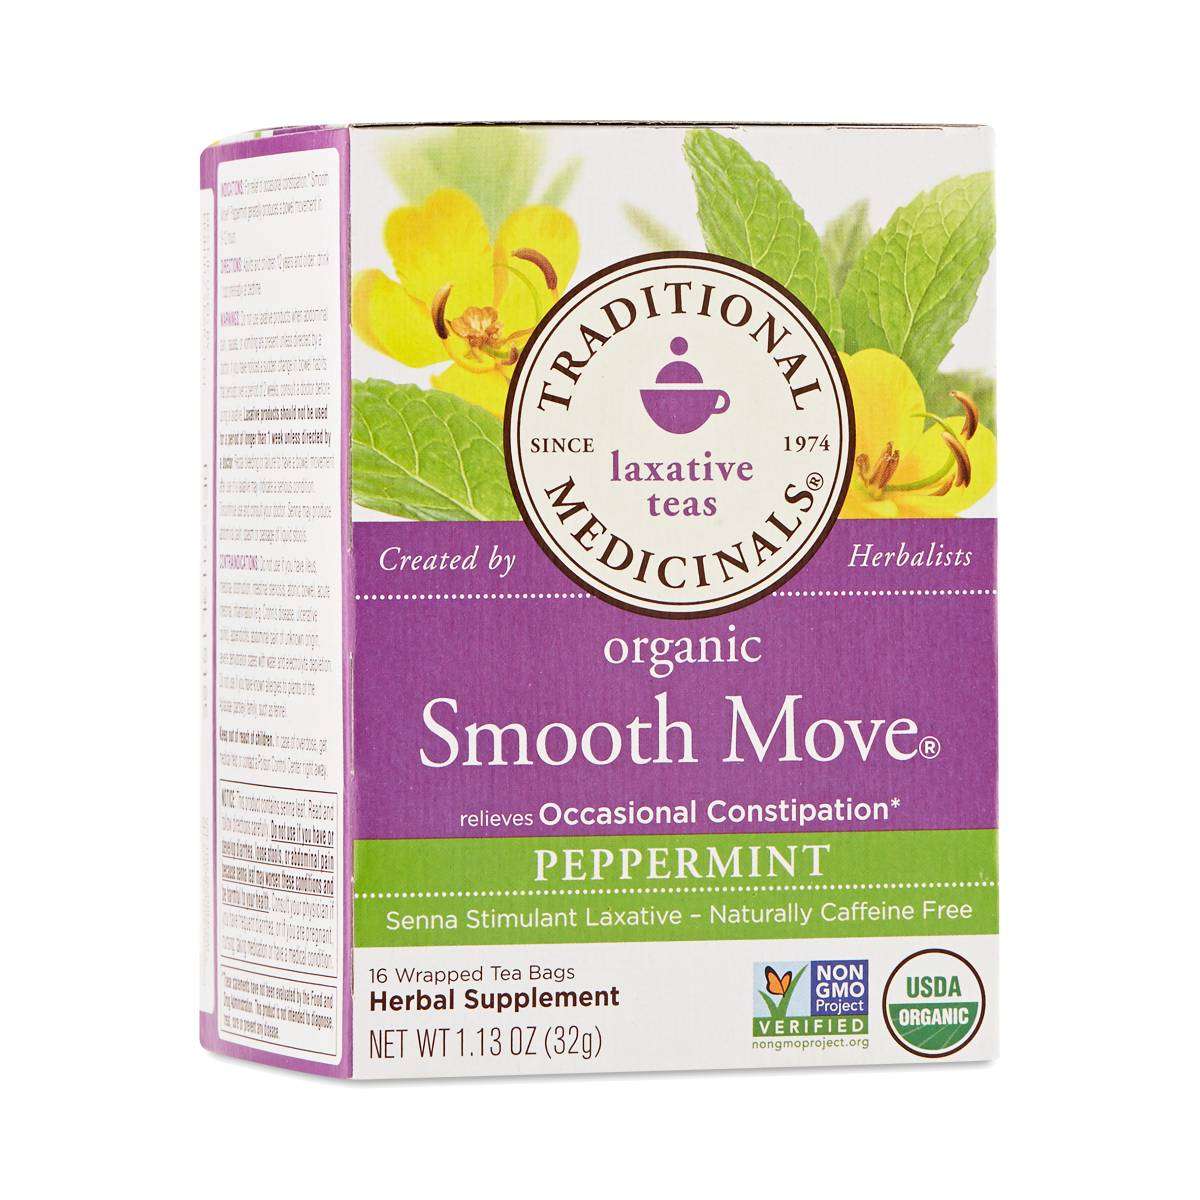 Organic Smooth Move Tea by Traditional Medicinals